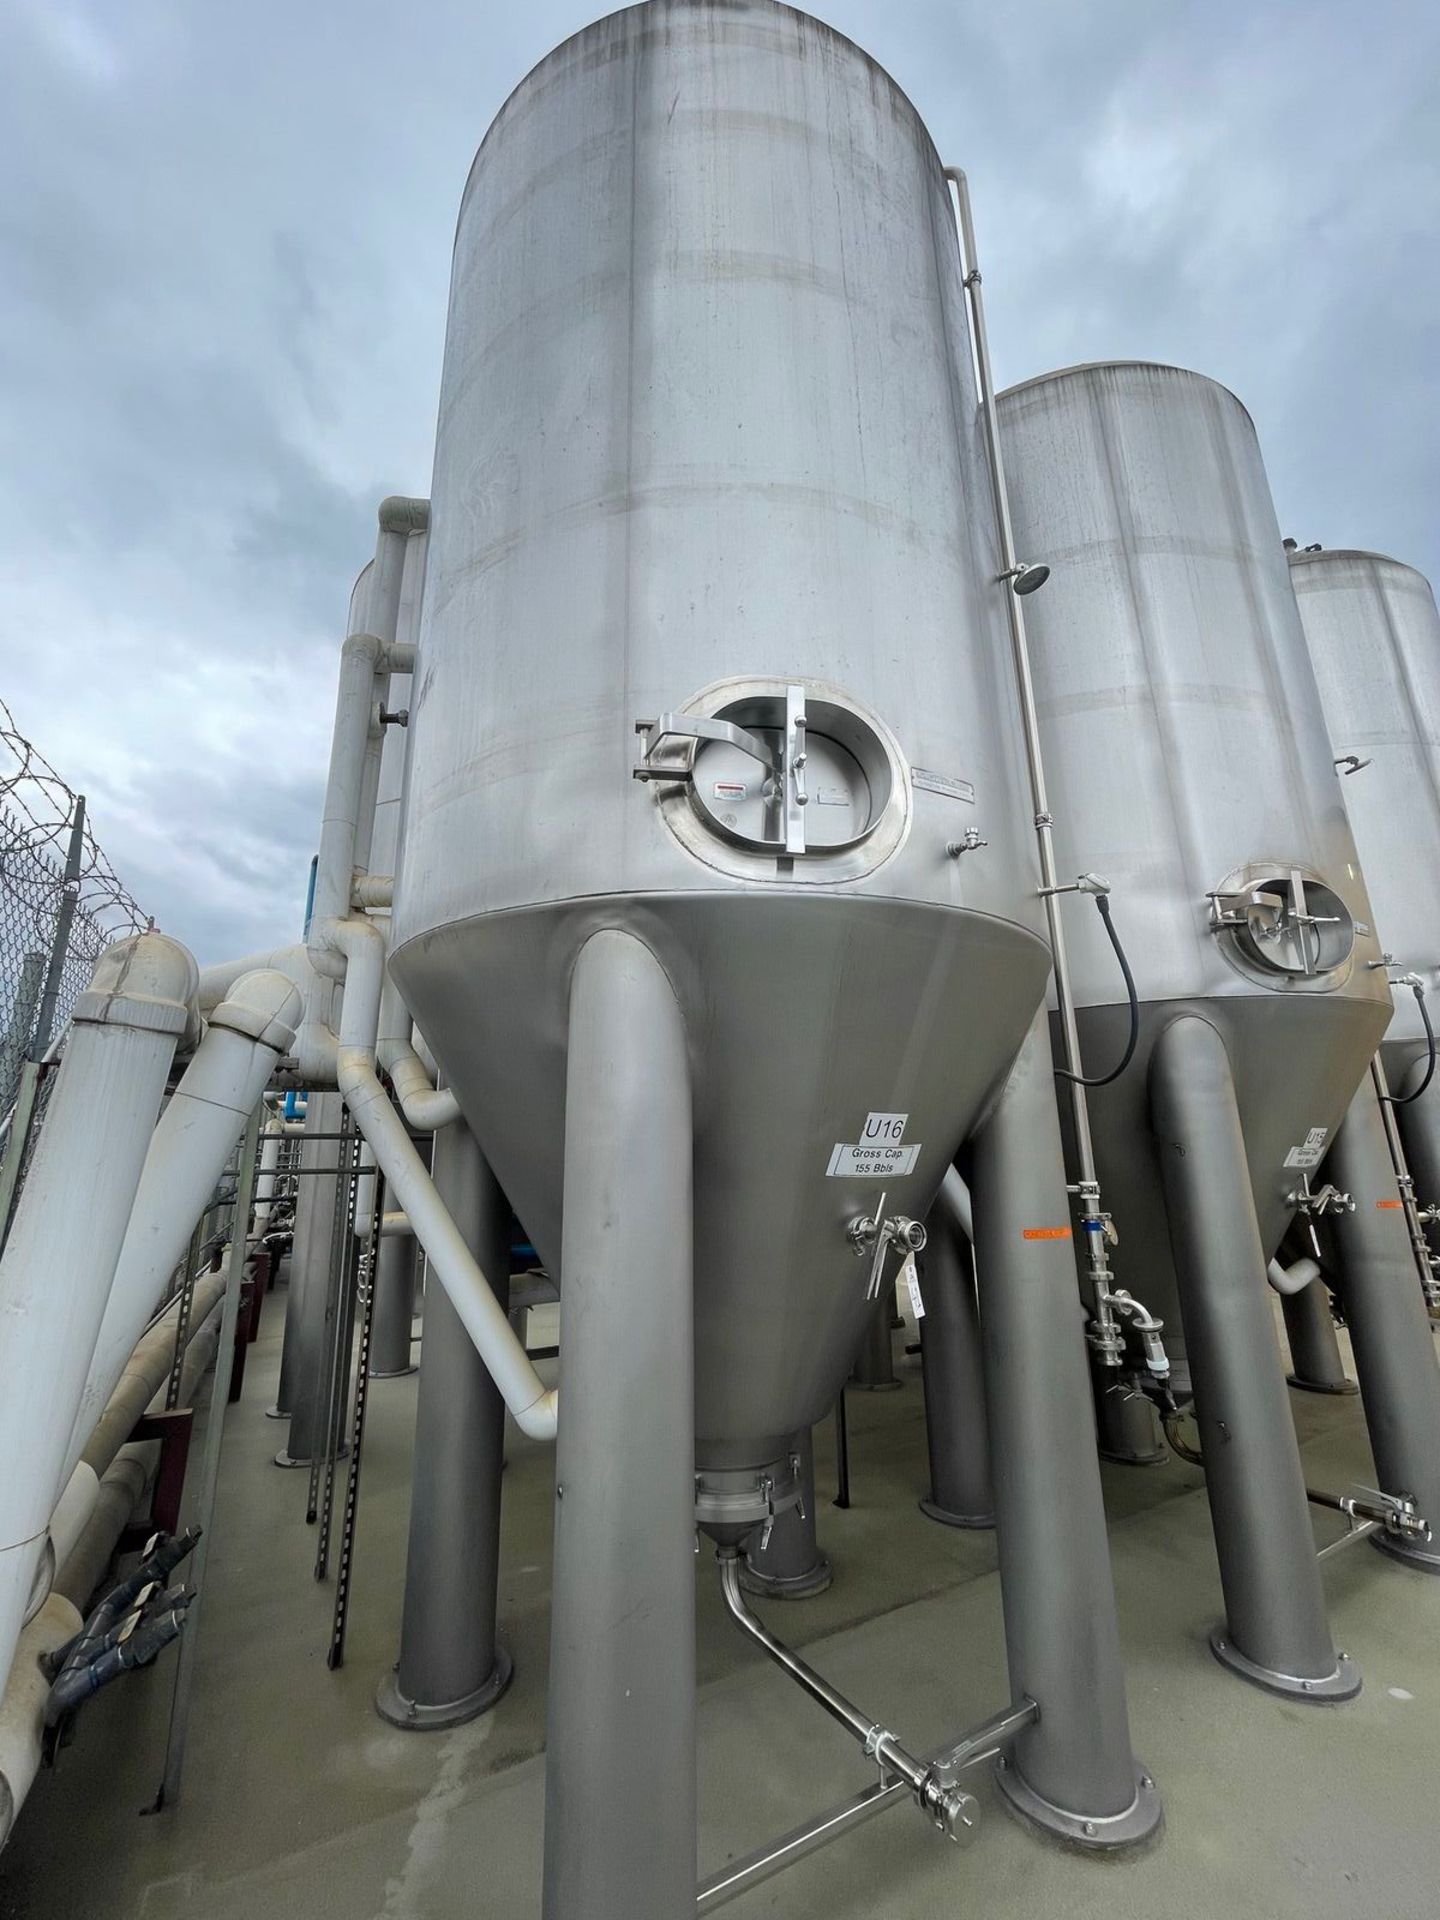 MUELLER 155 BBL UNITANK FERMENTER WITH 20 PSI RATING (5000 GALLON JACKETED TANK) | Rig Fee: 2500